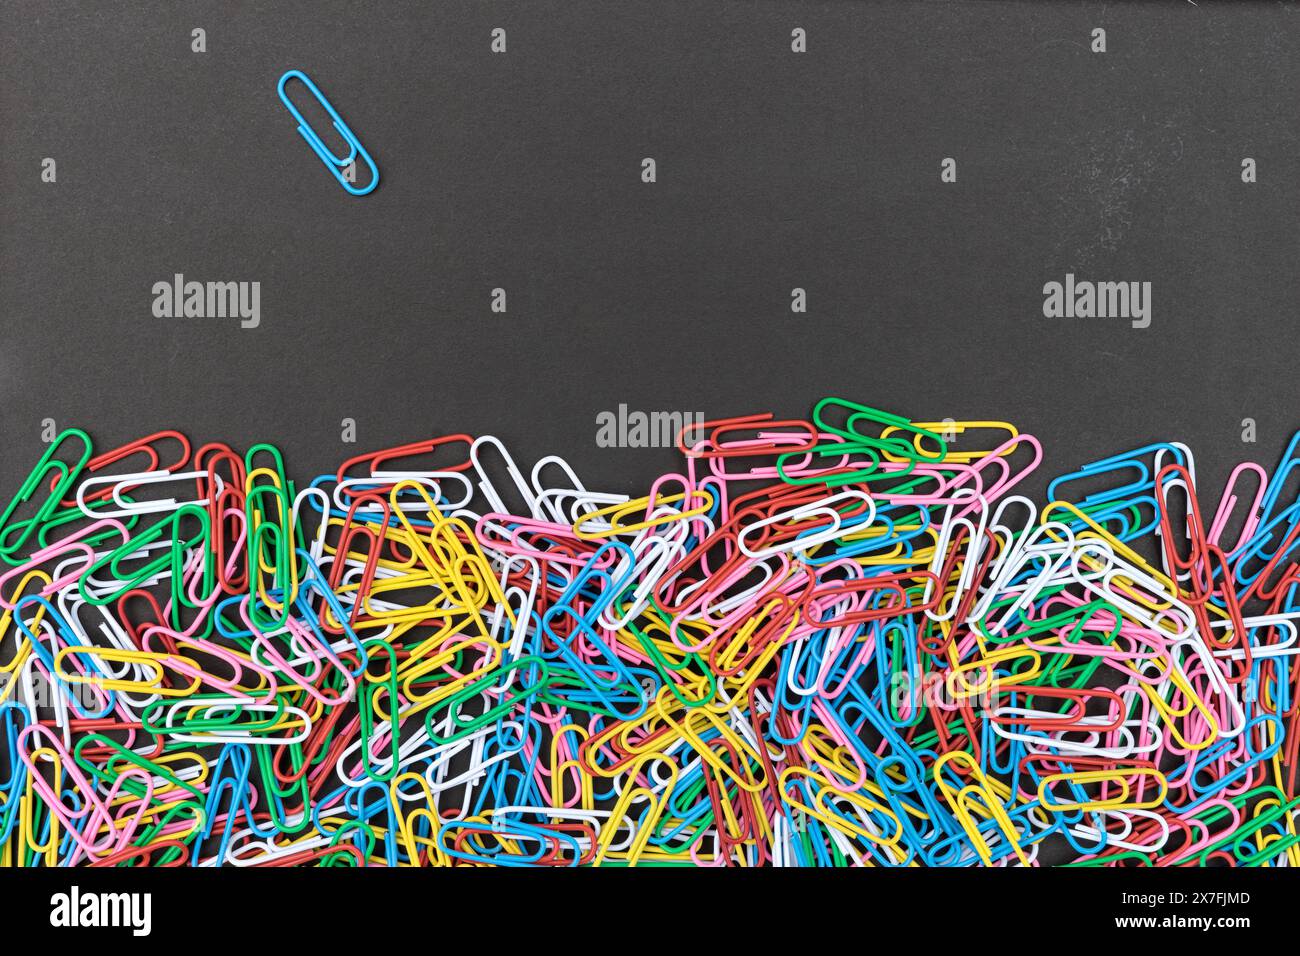 Black background with colorful paper clips and copy space Stock Photo